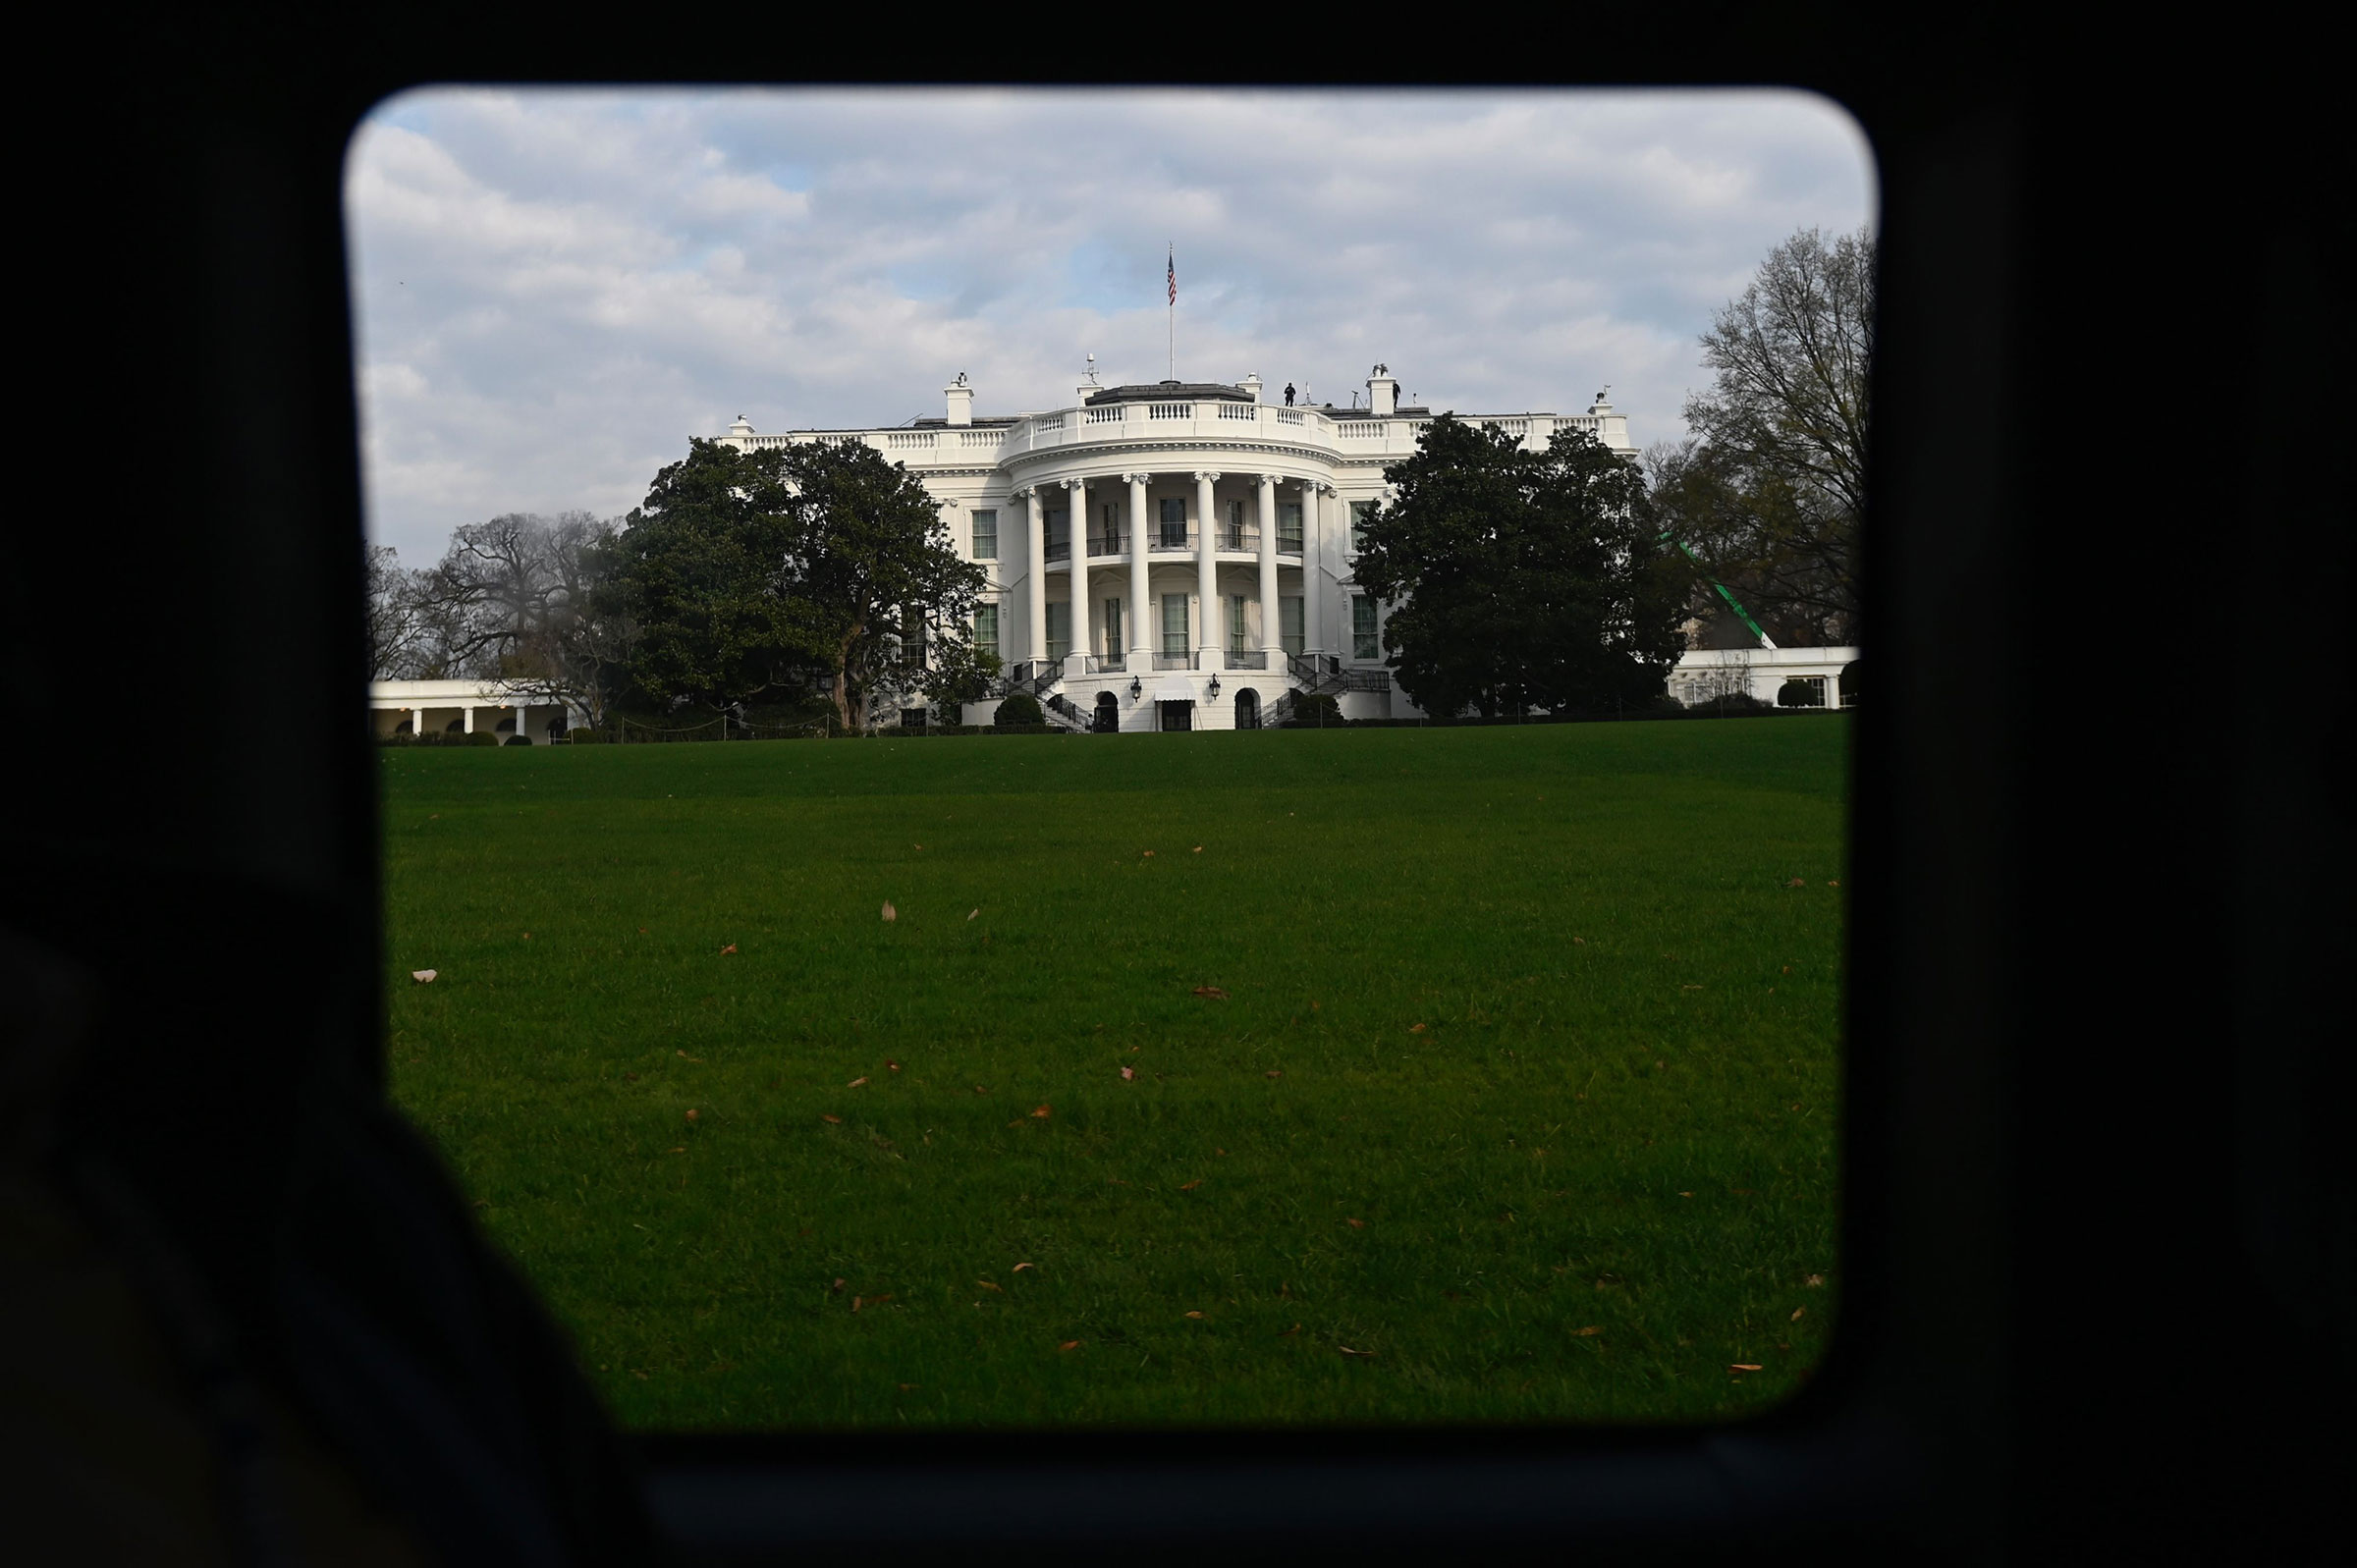 The White House is seen through a vehicle in the presidential motorcade in Washington, on Nov. 21, 2020. (Andrew Caballero-Reynolds—AFP/Getty Images)